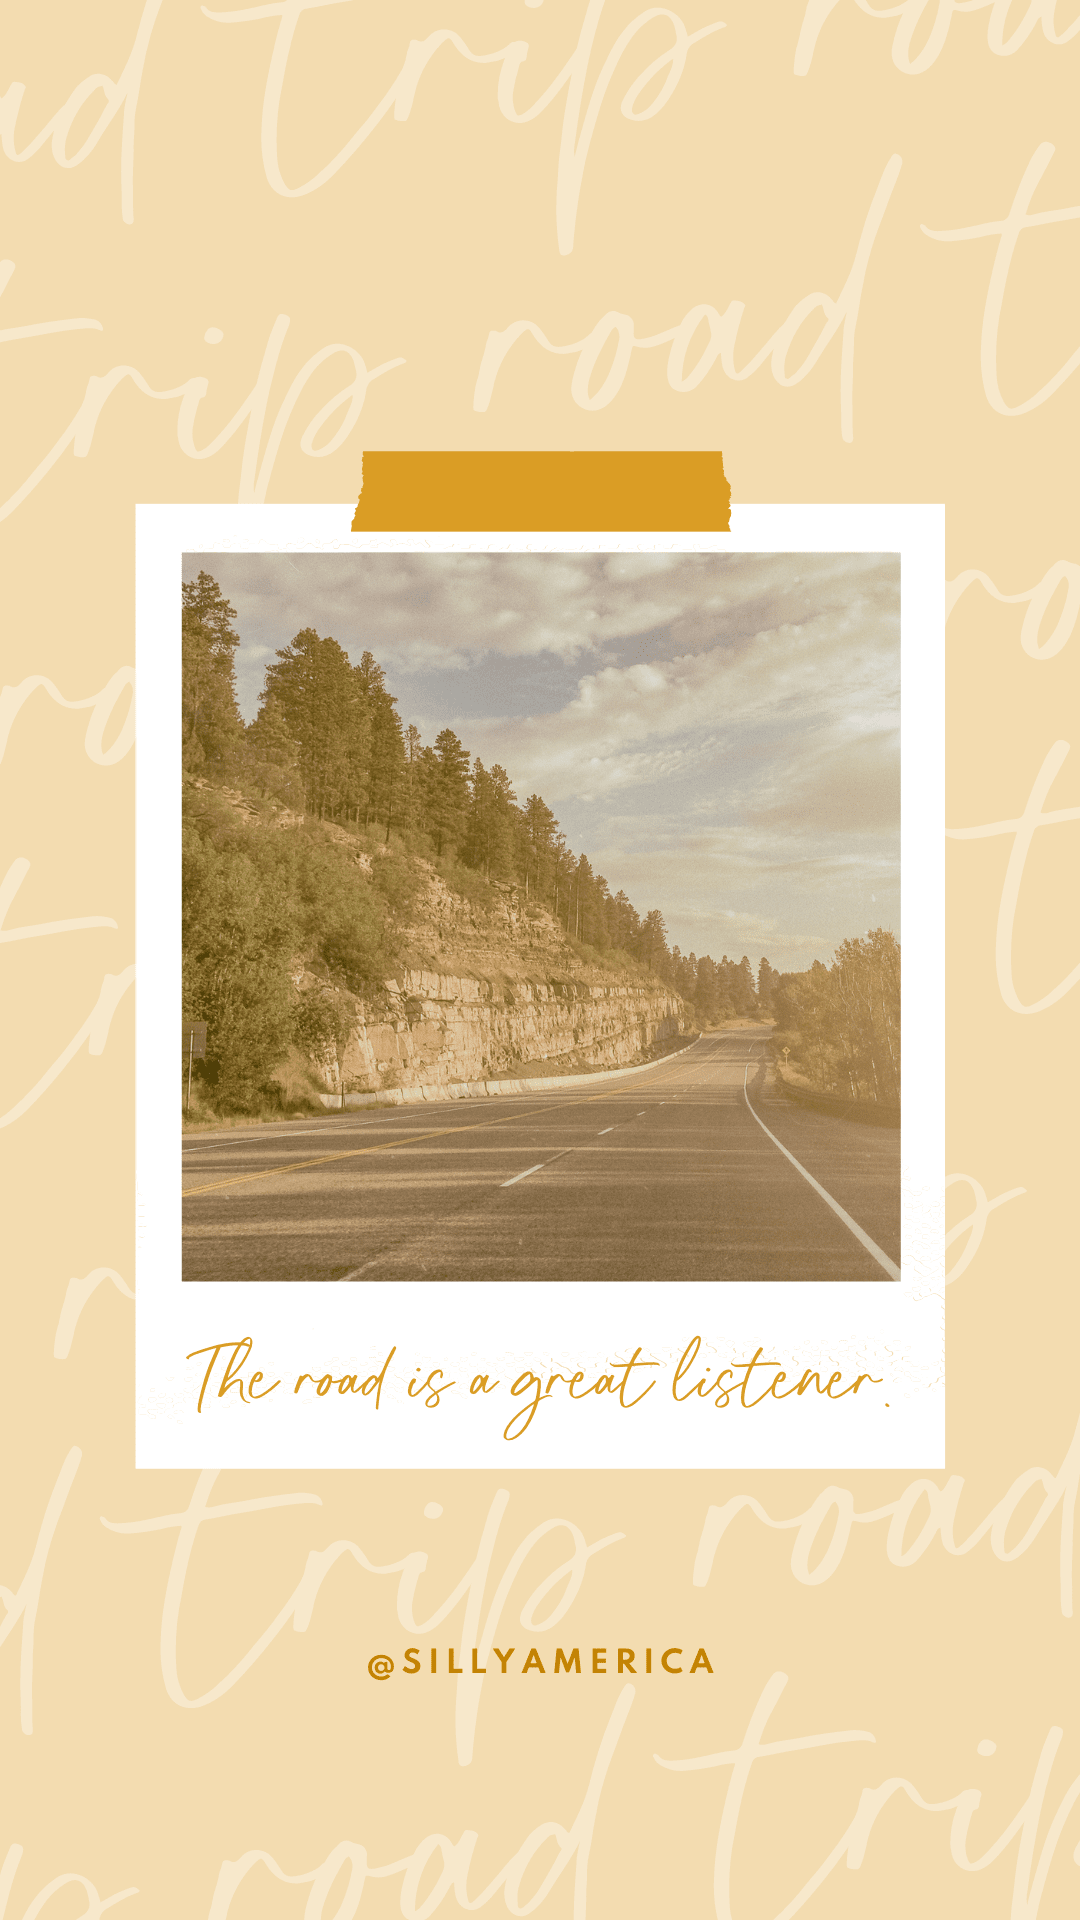 The road is a great listener. - Road Trip Captions for Instagram